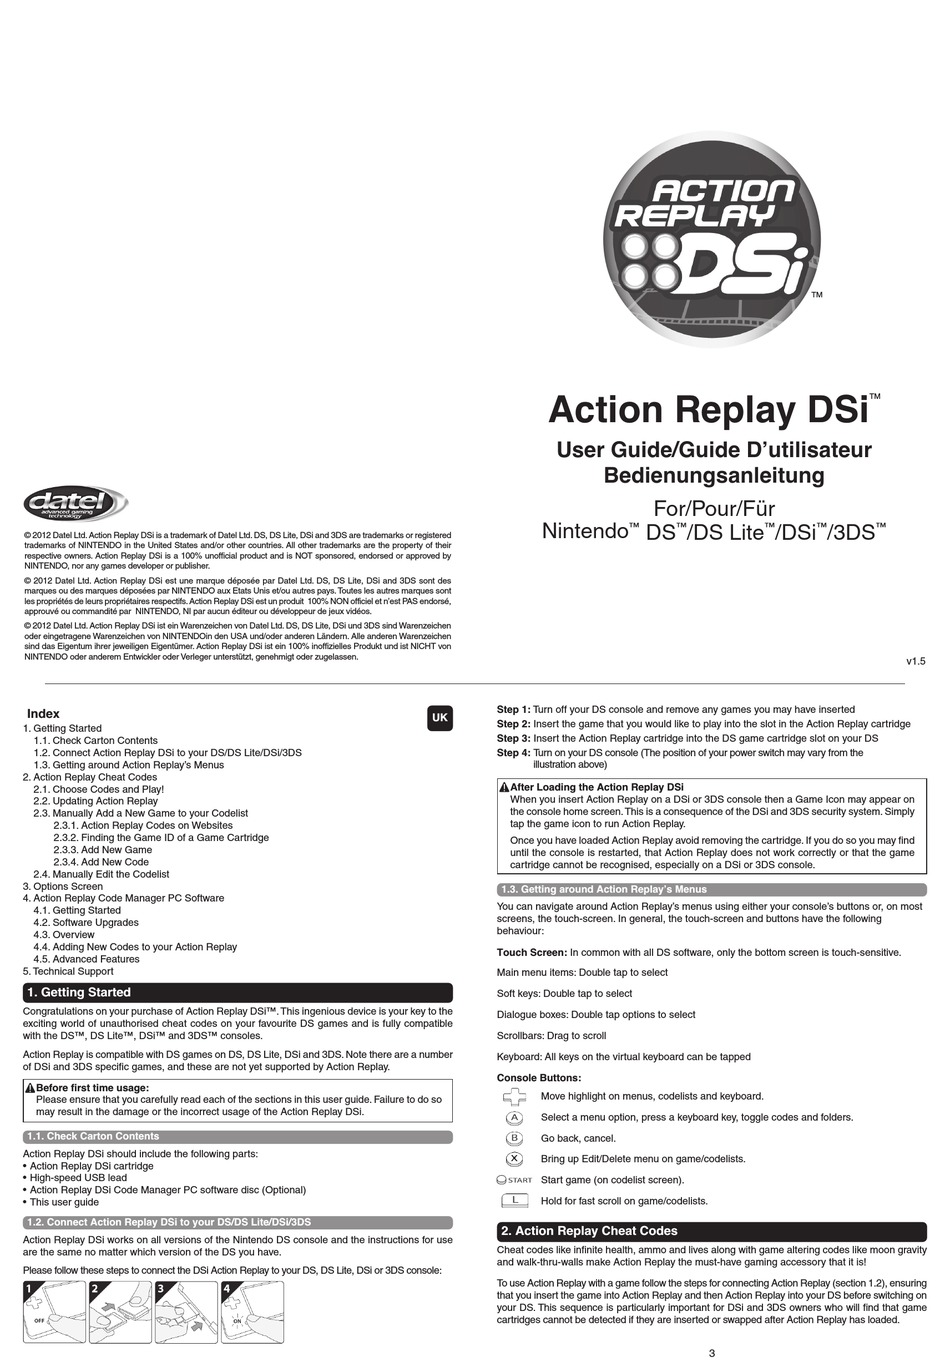 codejunkies action replay dsi software download